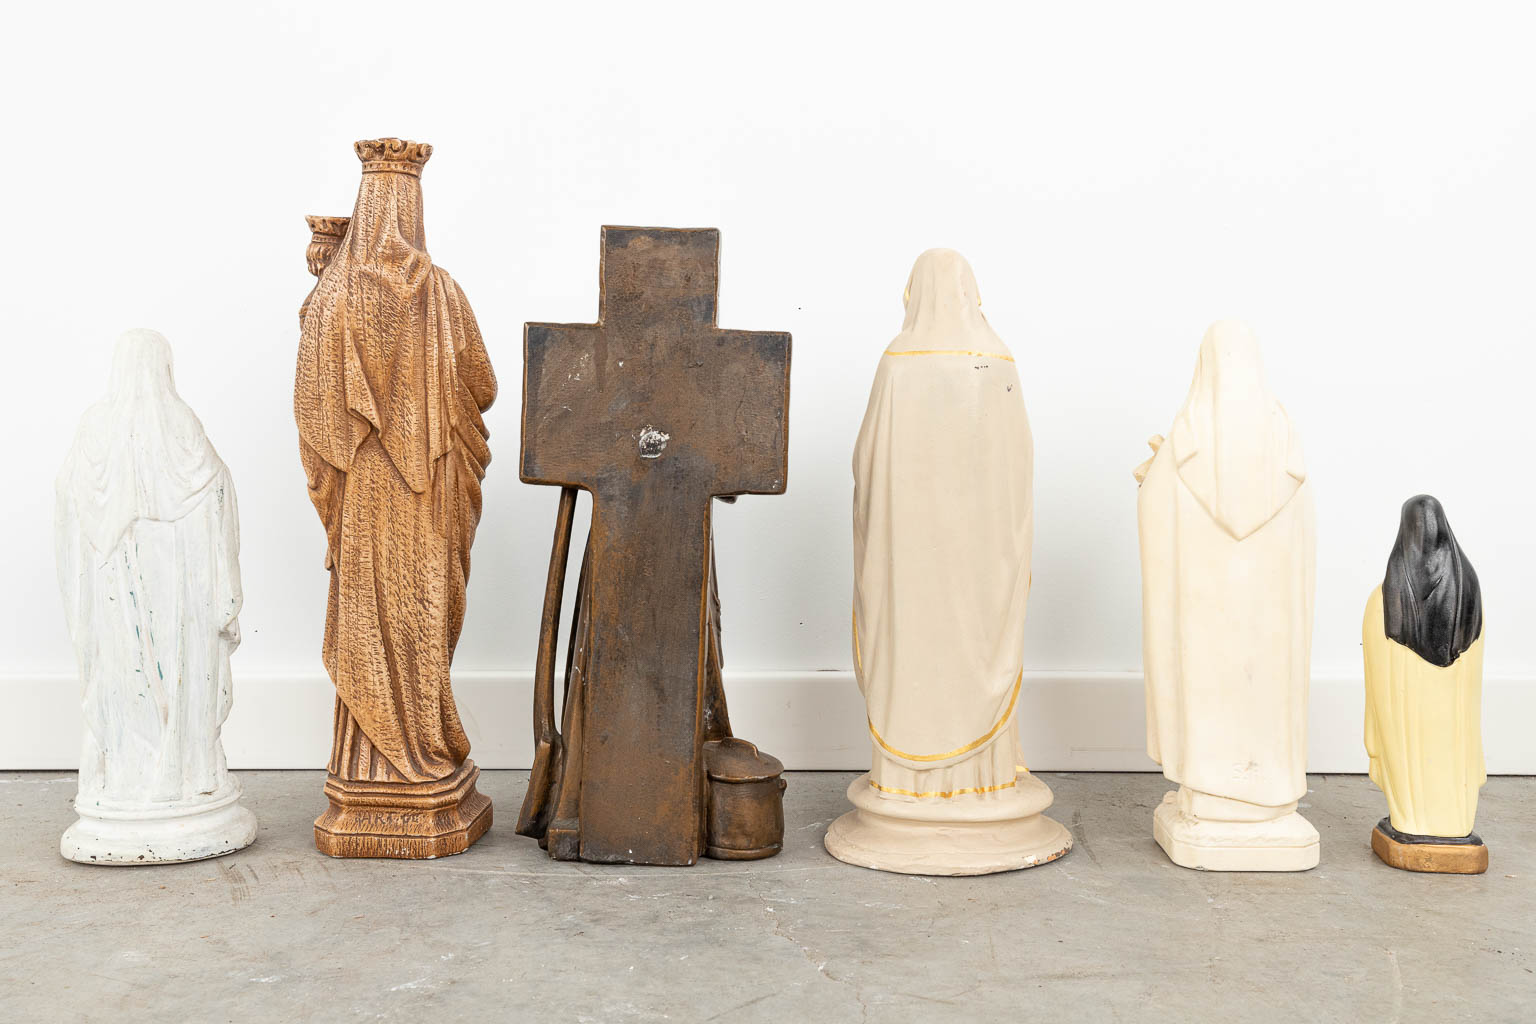 A large collection of statues of Holy figurines, made of polychrome and monochrome plaster and marble. (H:79cm)